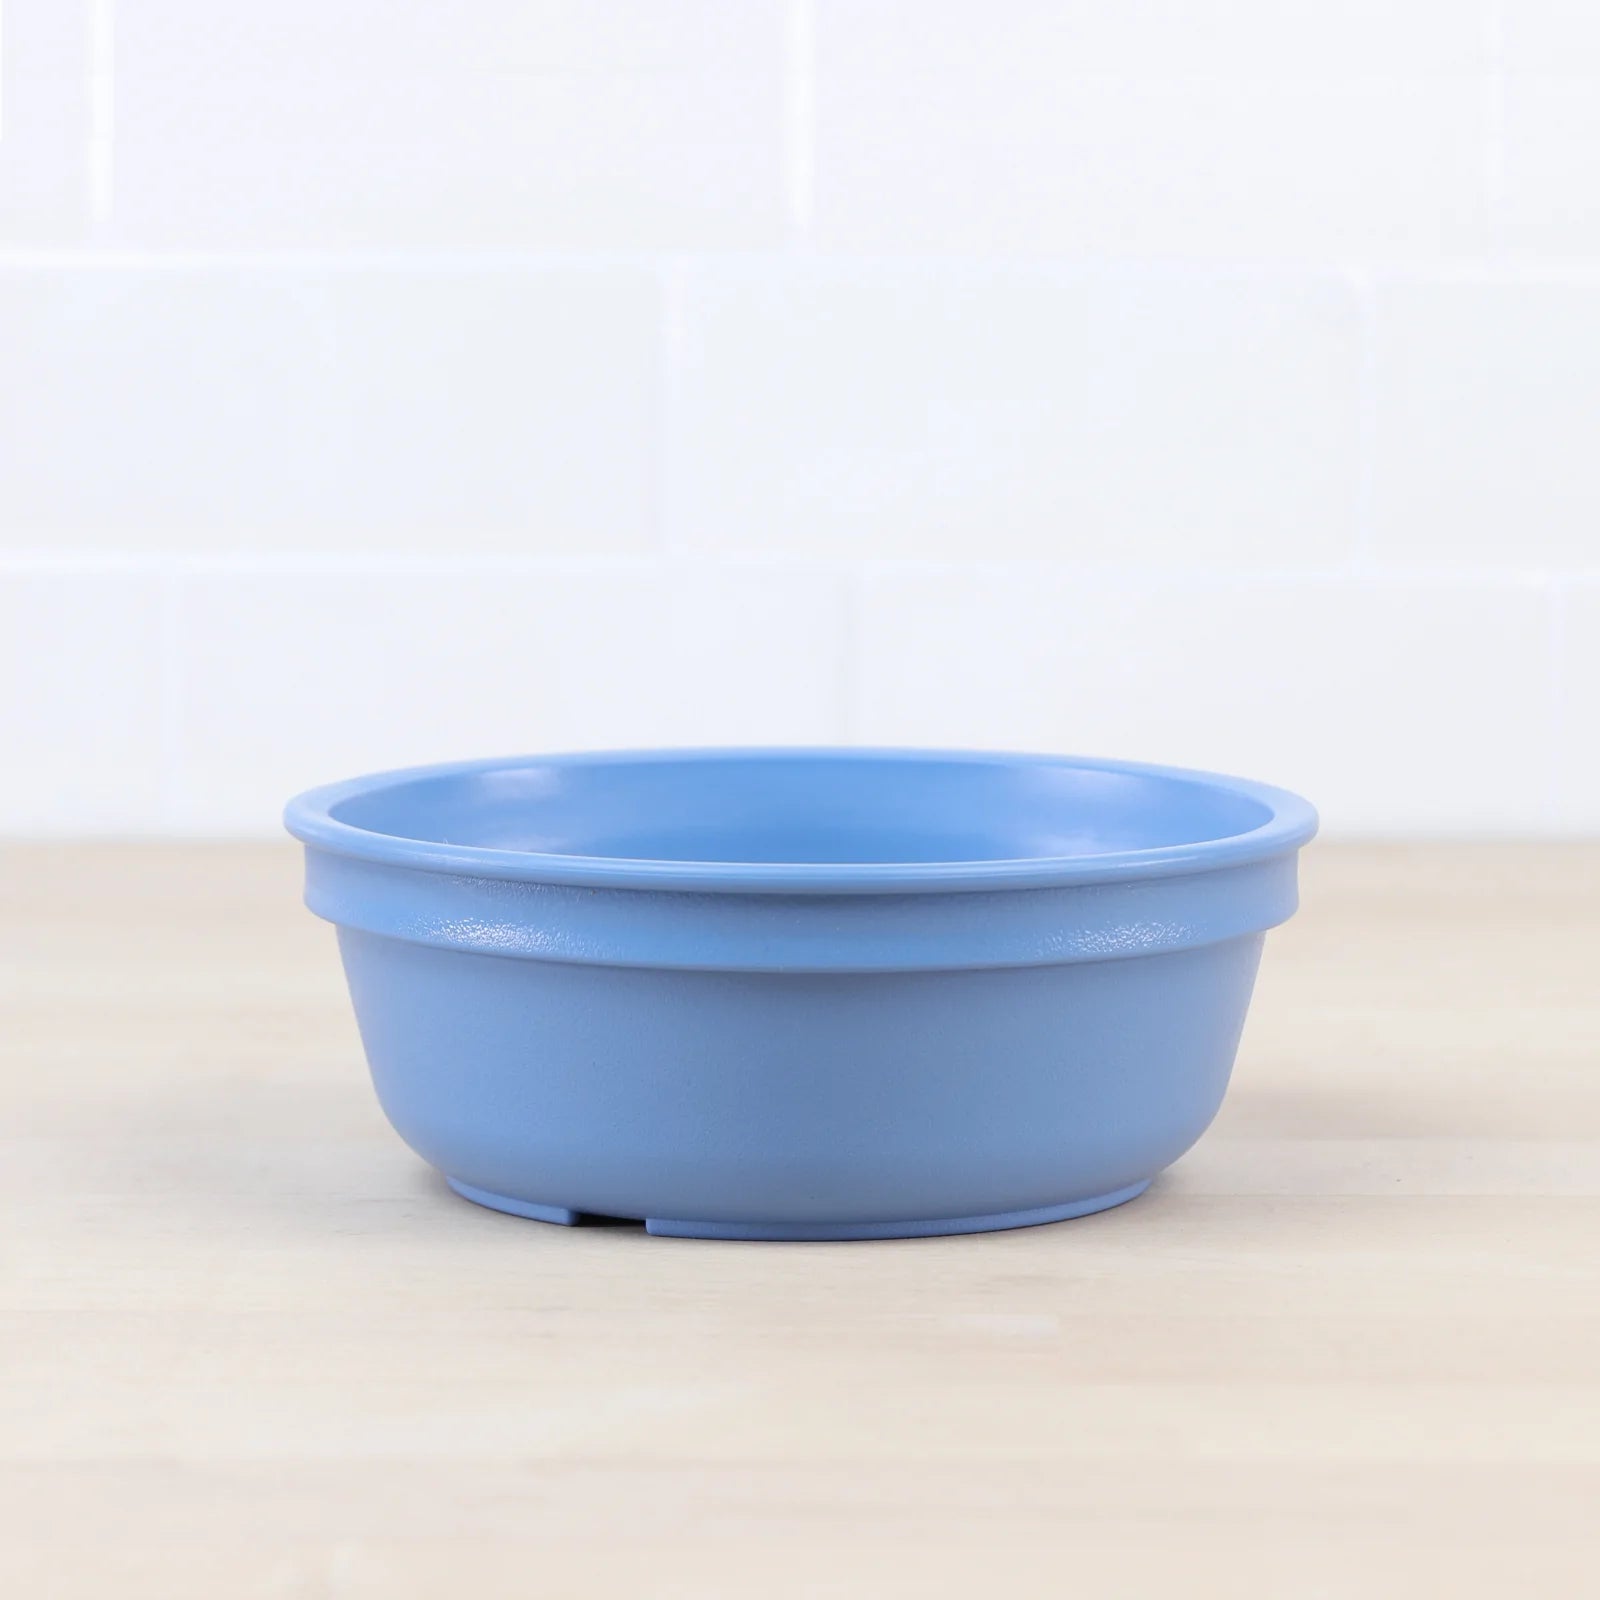 Re-Play - 12oz. Bowls - all things being eco chilliwack canada - kids clothing and accessories store - denim